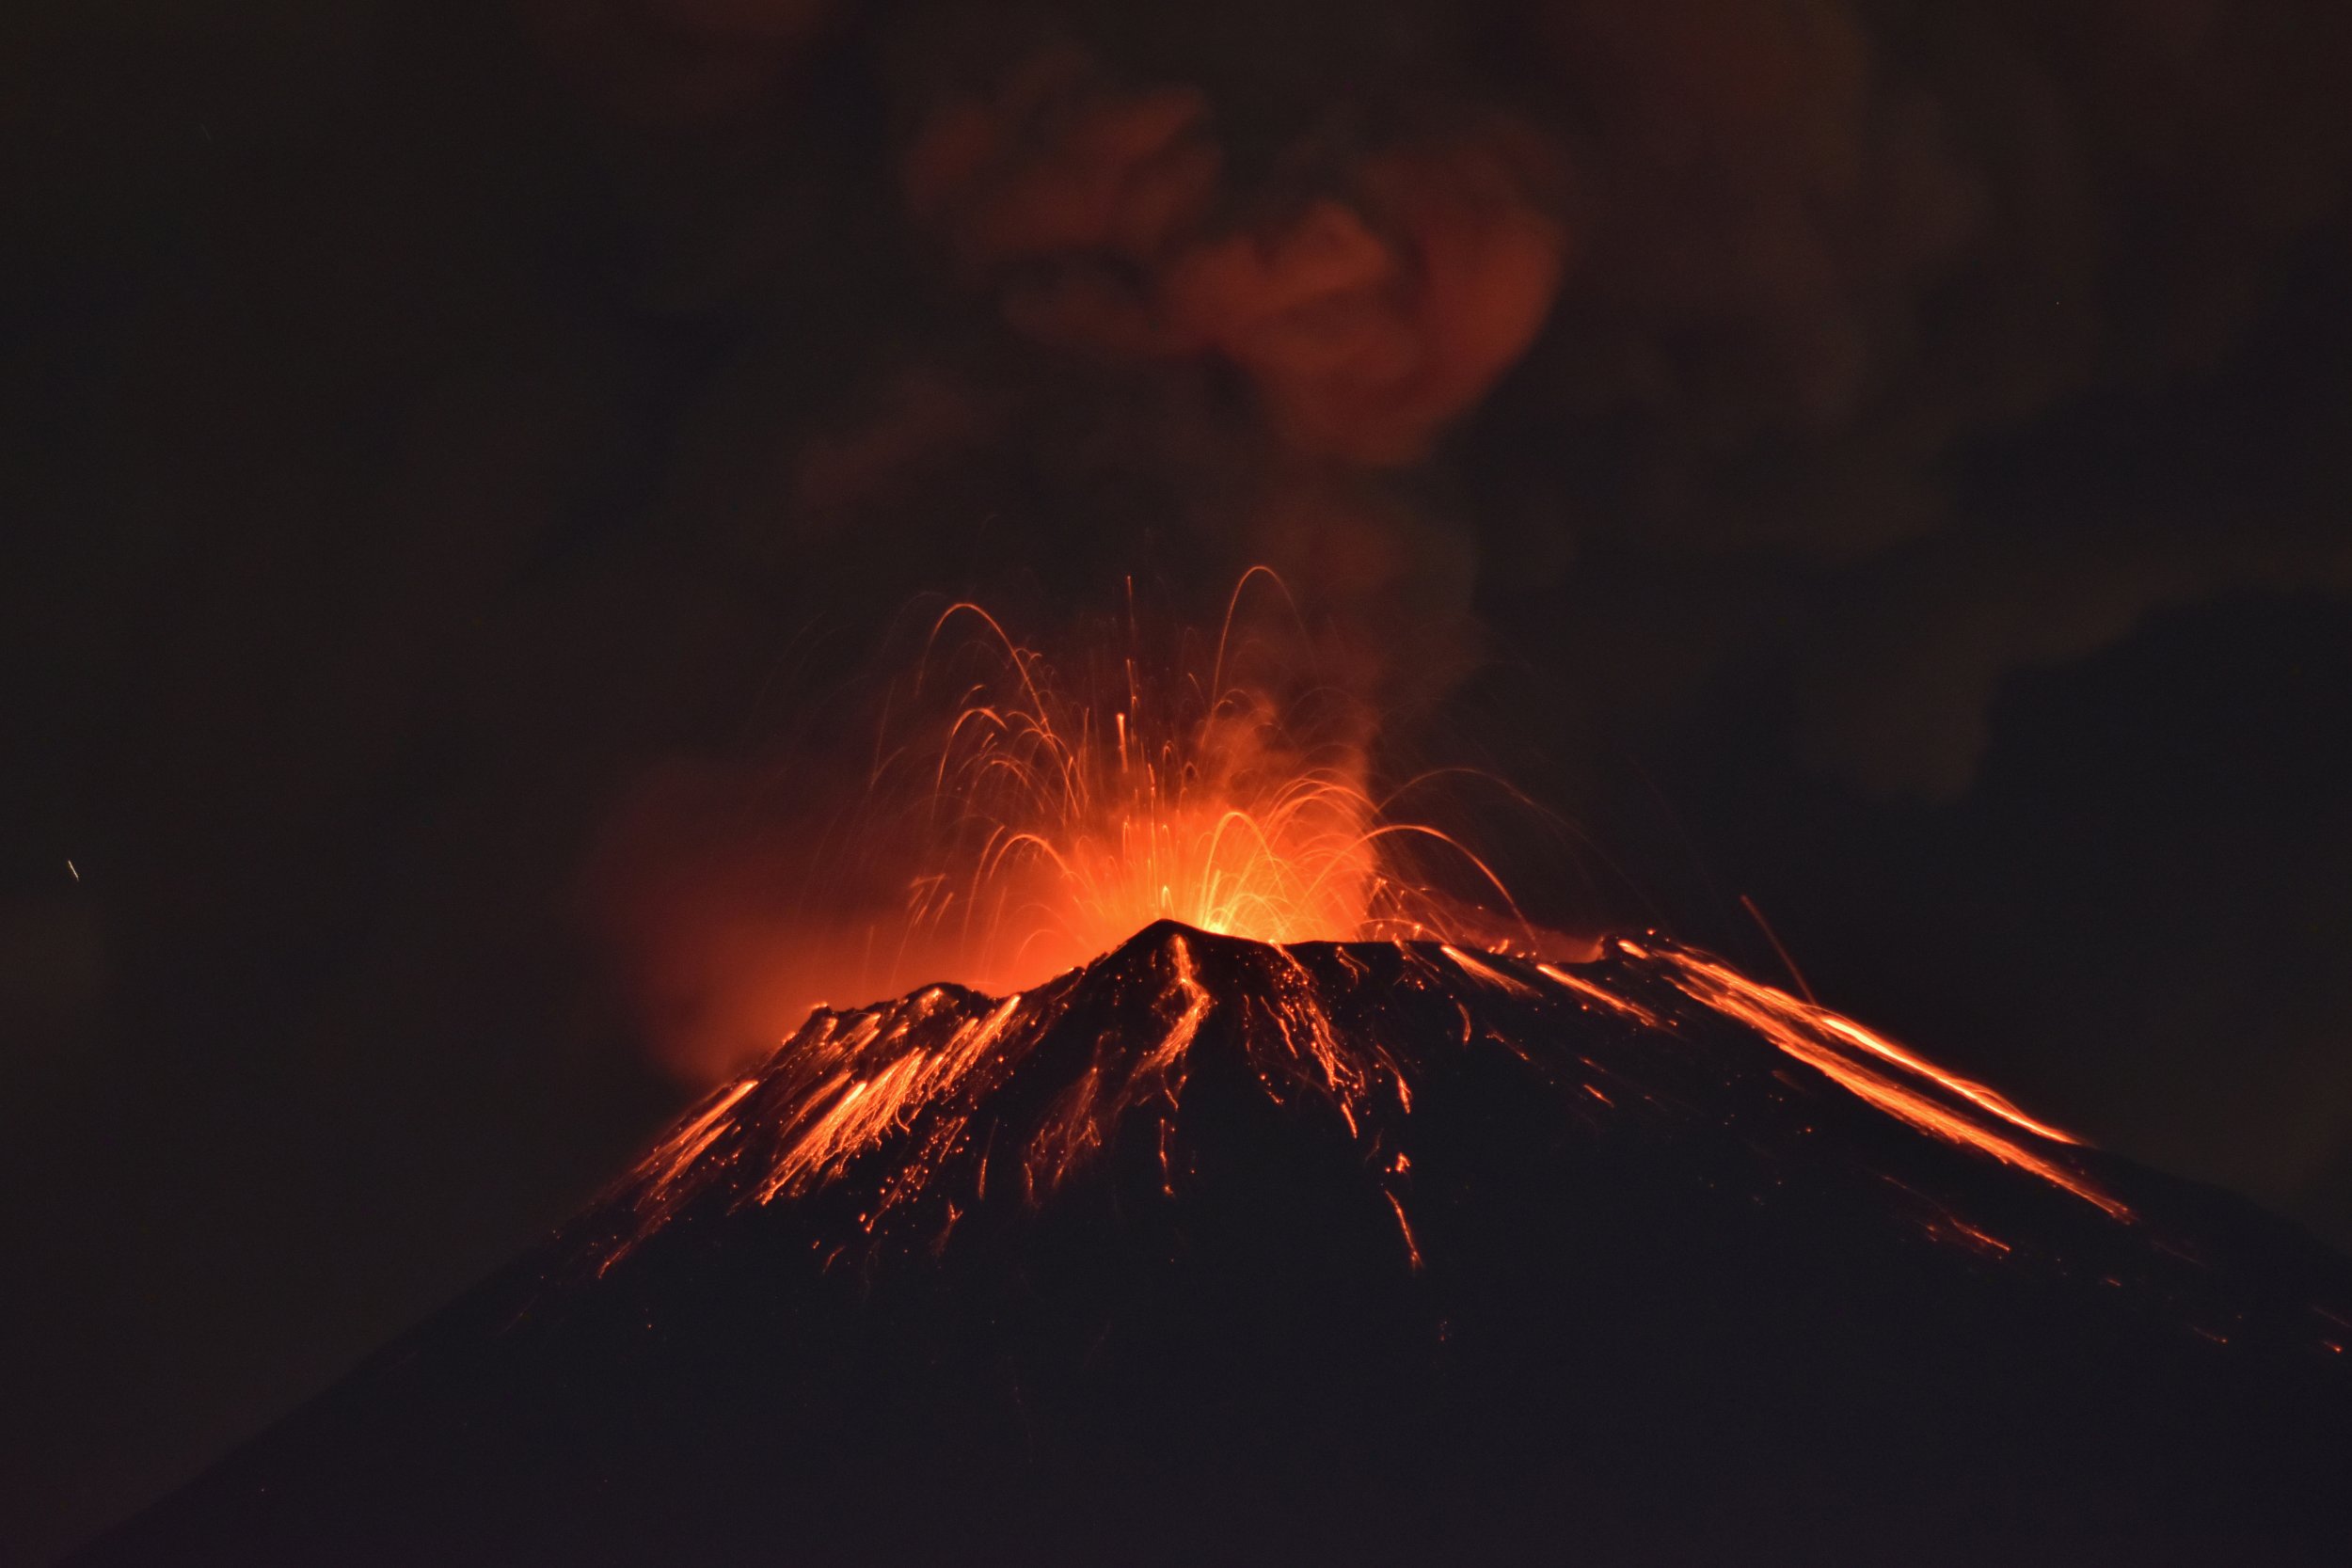 Monstrous Volcano Eruption That Lasted A Millennium Covered Pacific Northwest In Lava 16 Million Years Ago